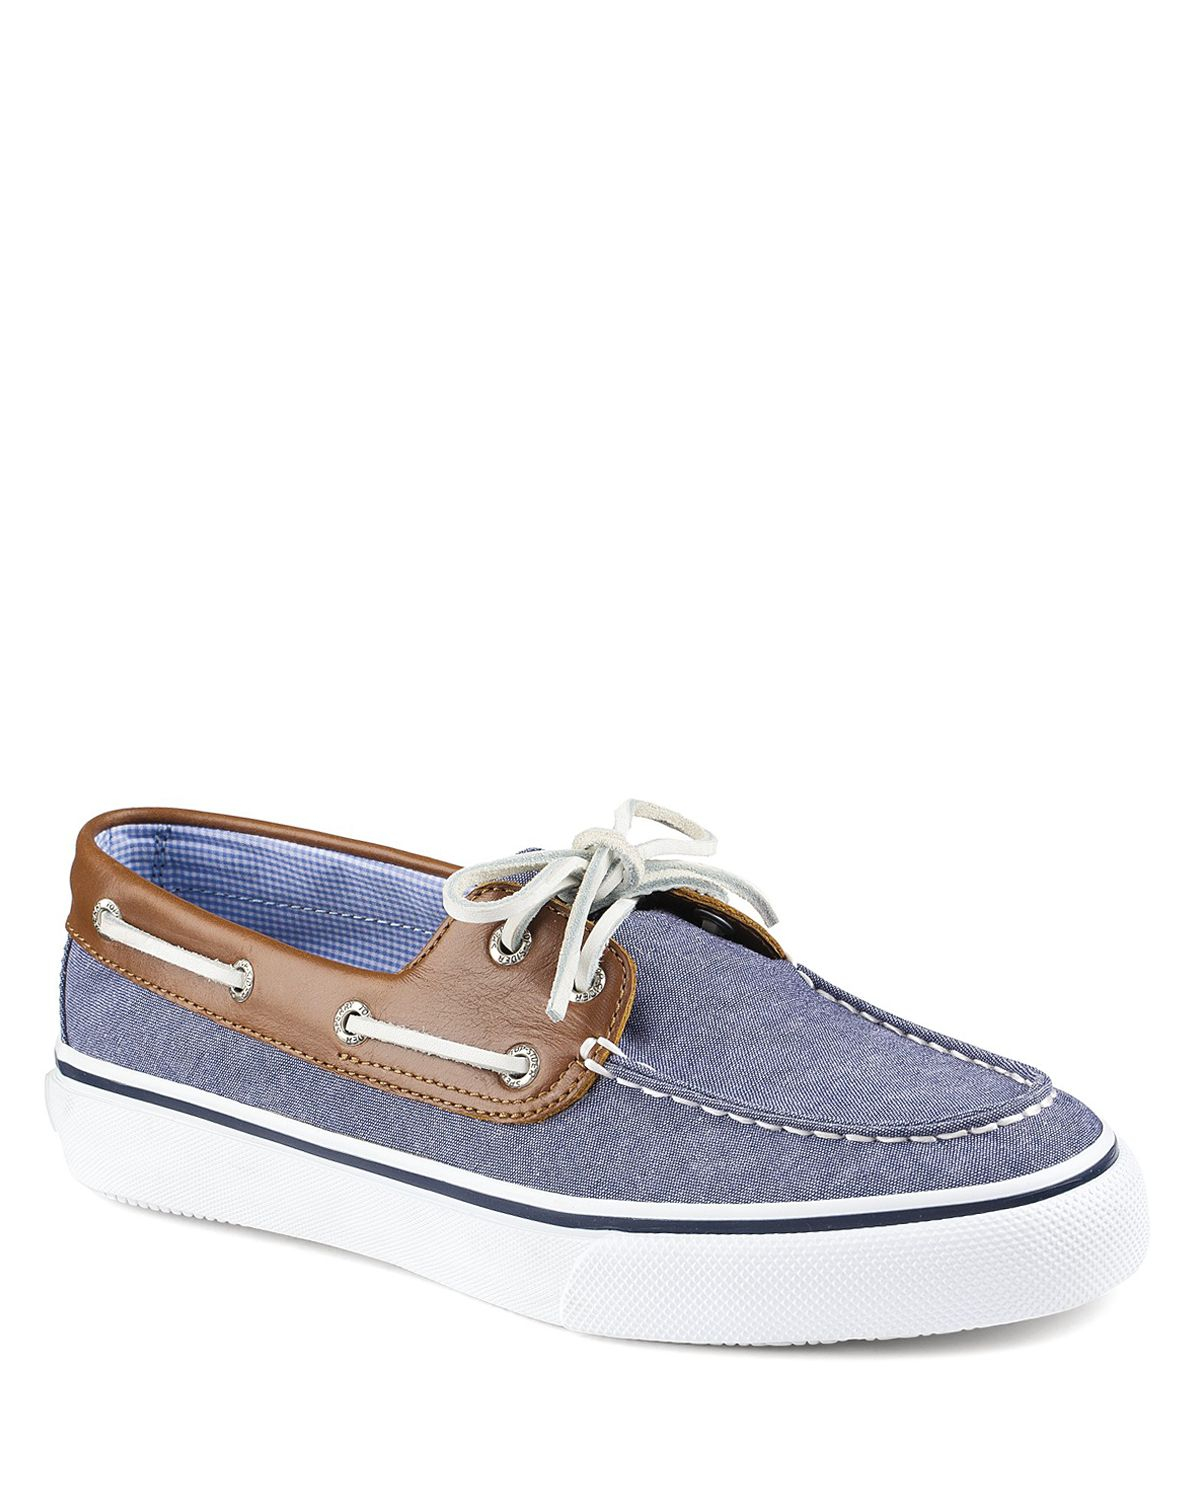 sperry top sider bahama 2